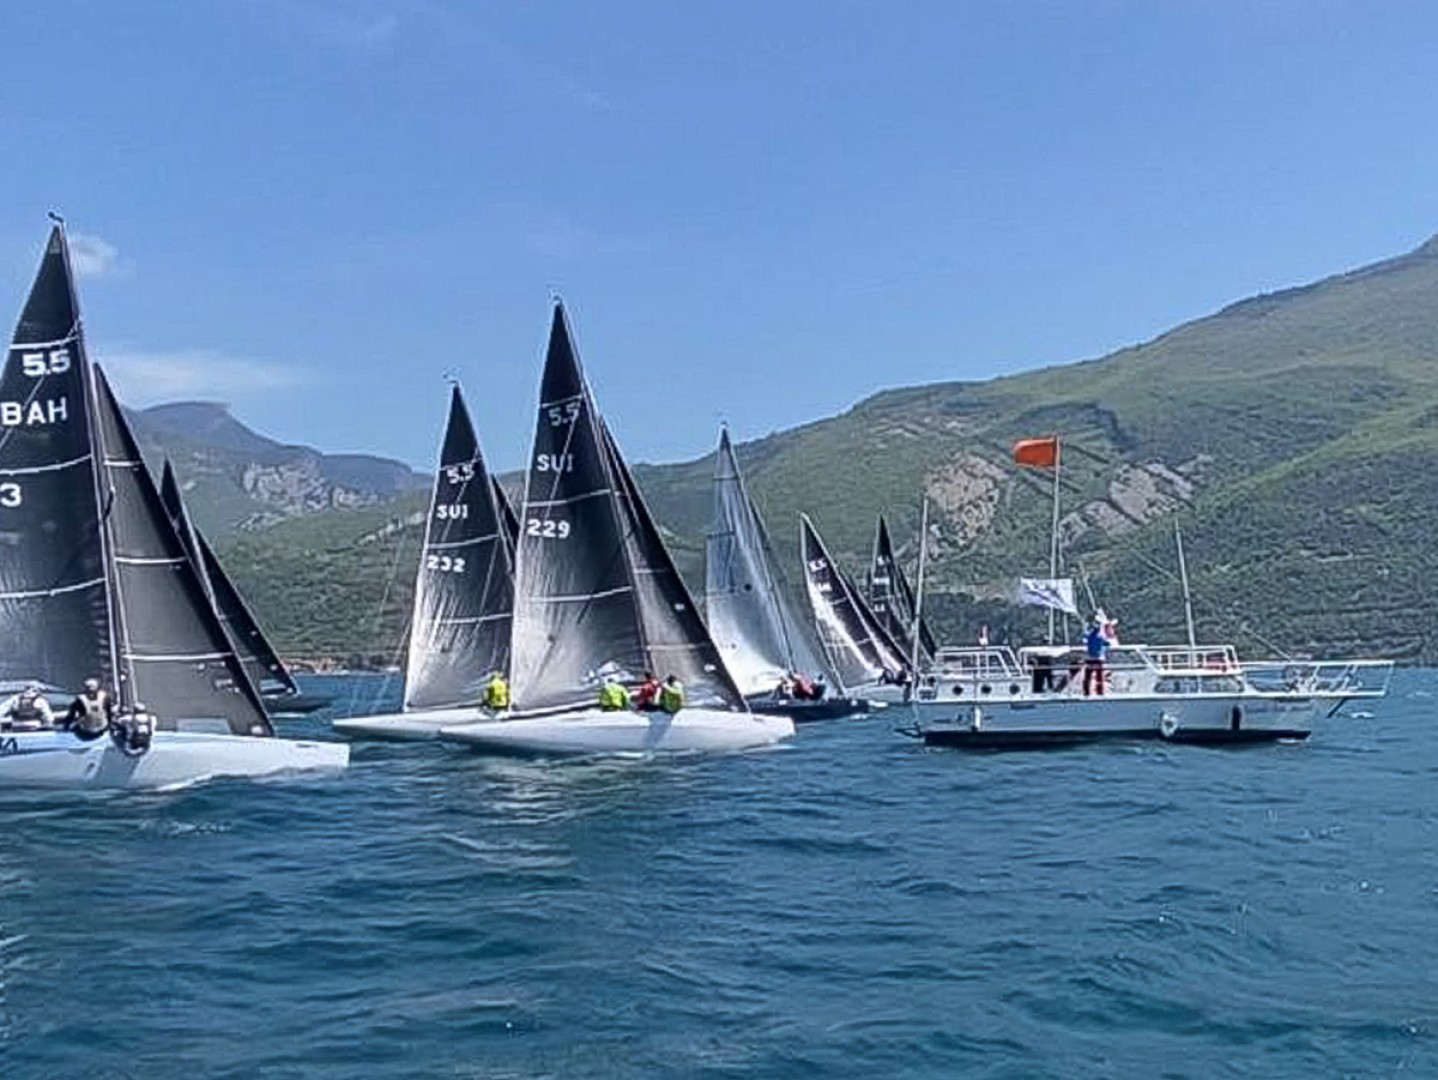 Jean Genie takes lead at Int. 5.5 Metre Alpen Cup at Torbole